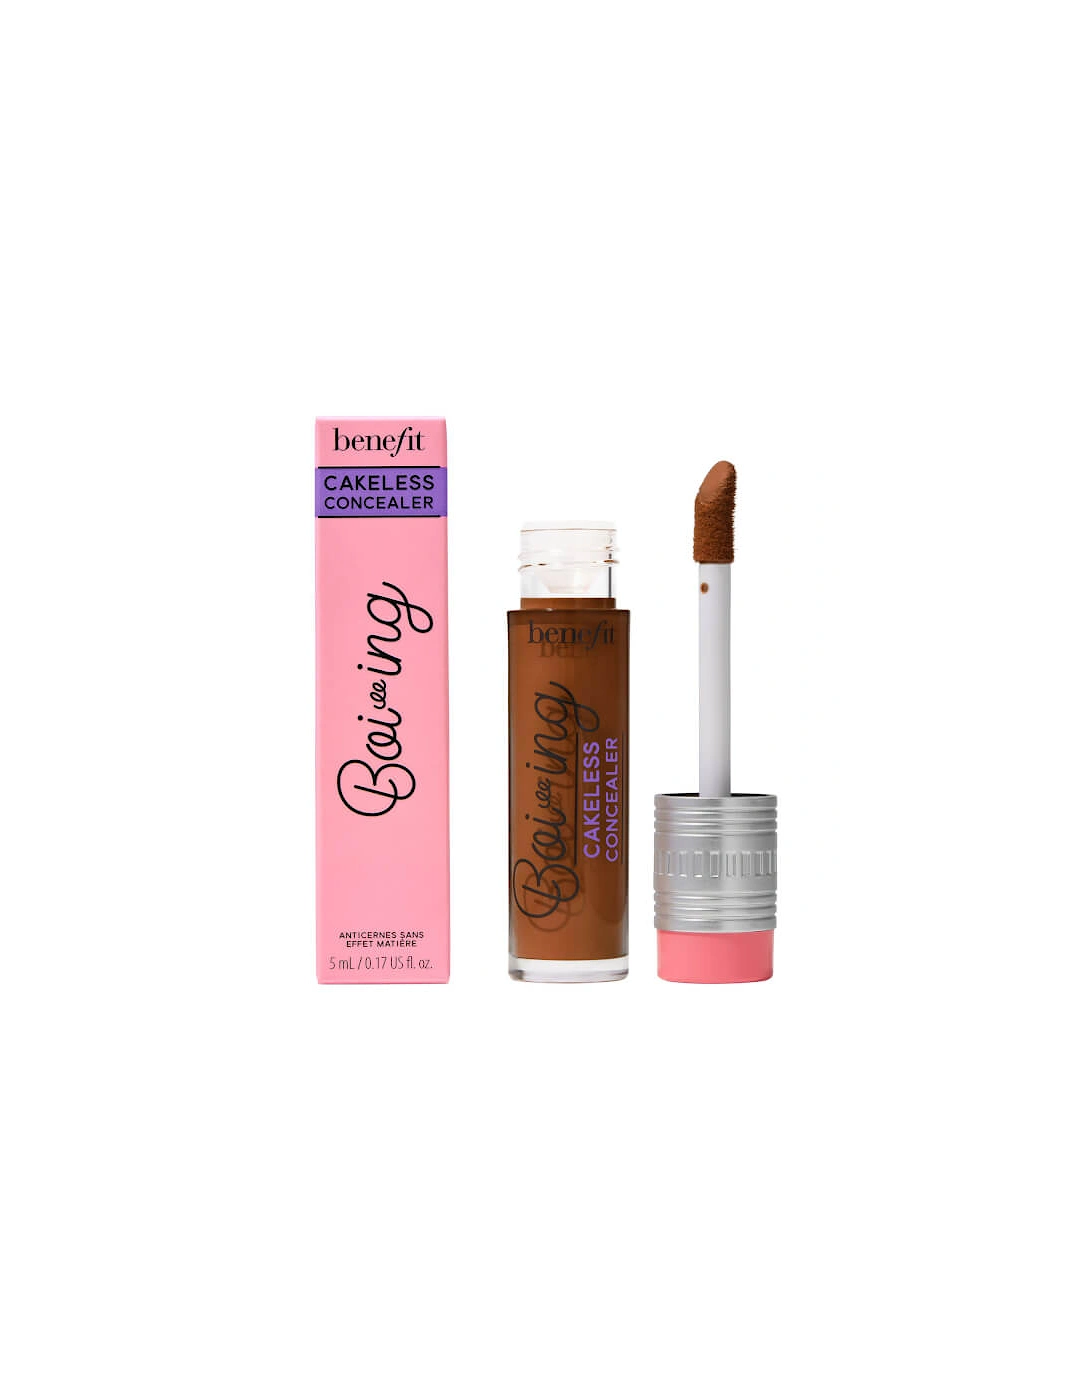 Boi-ing Cakeless Full Coverage Liquid Concealer - 17 Your Way, 2 of 1